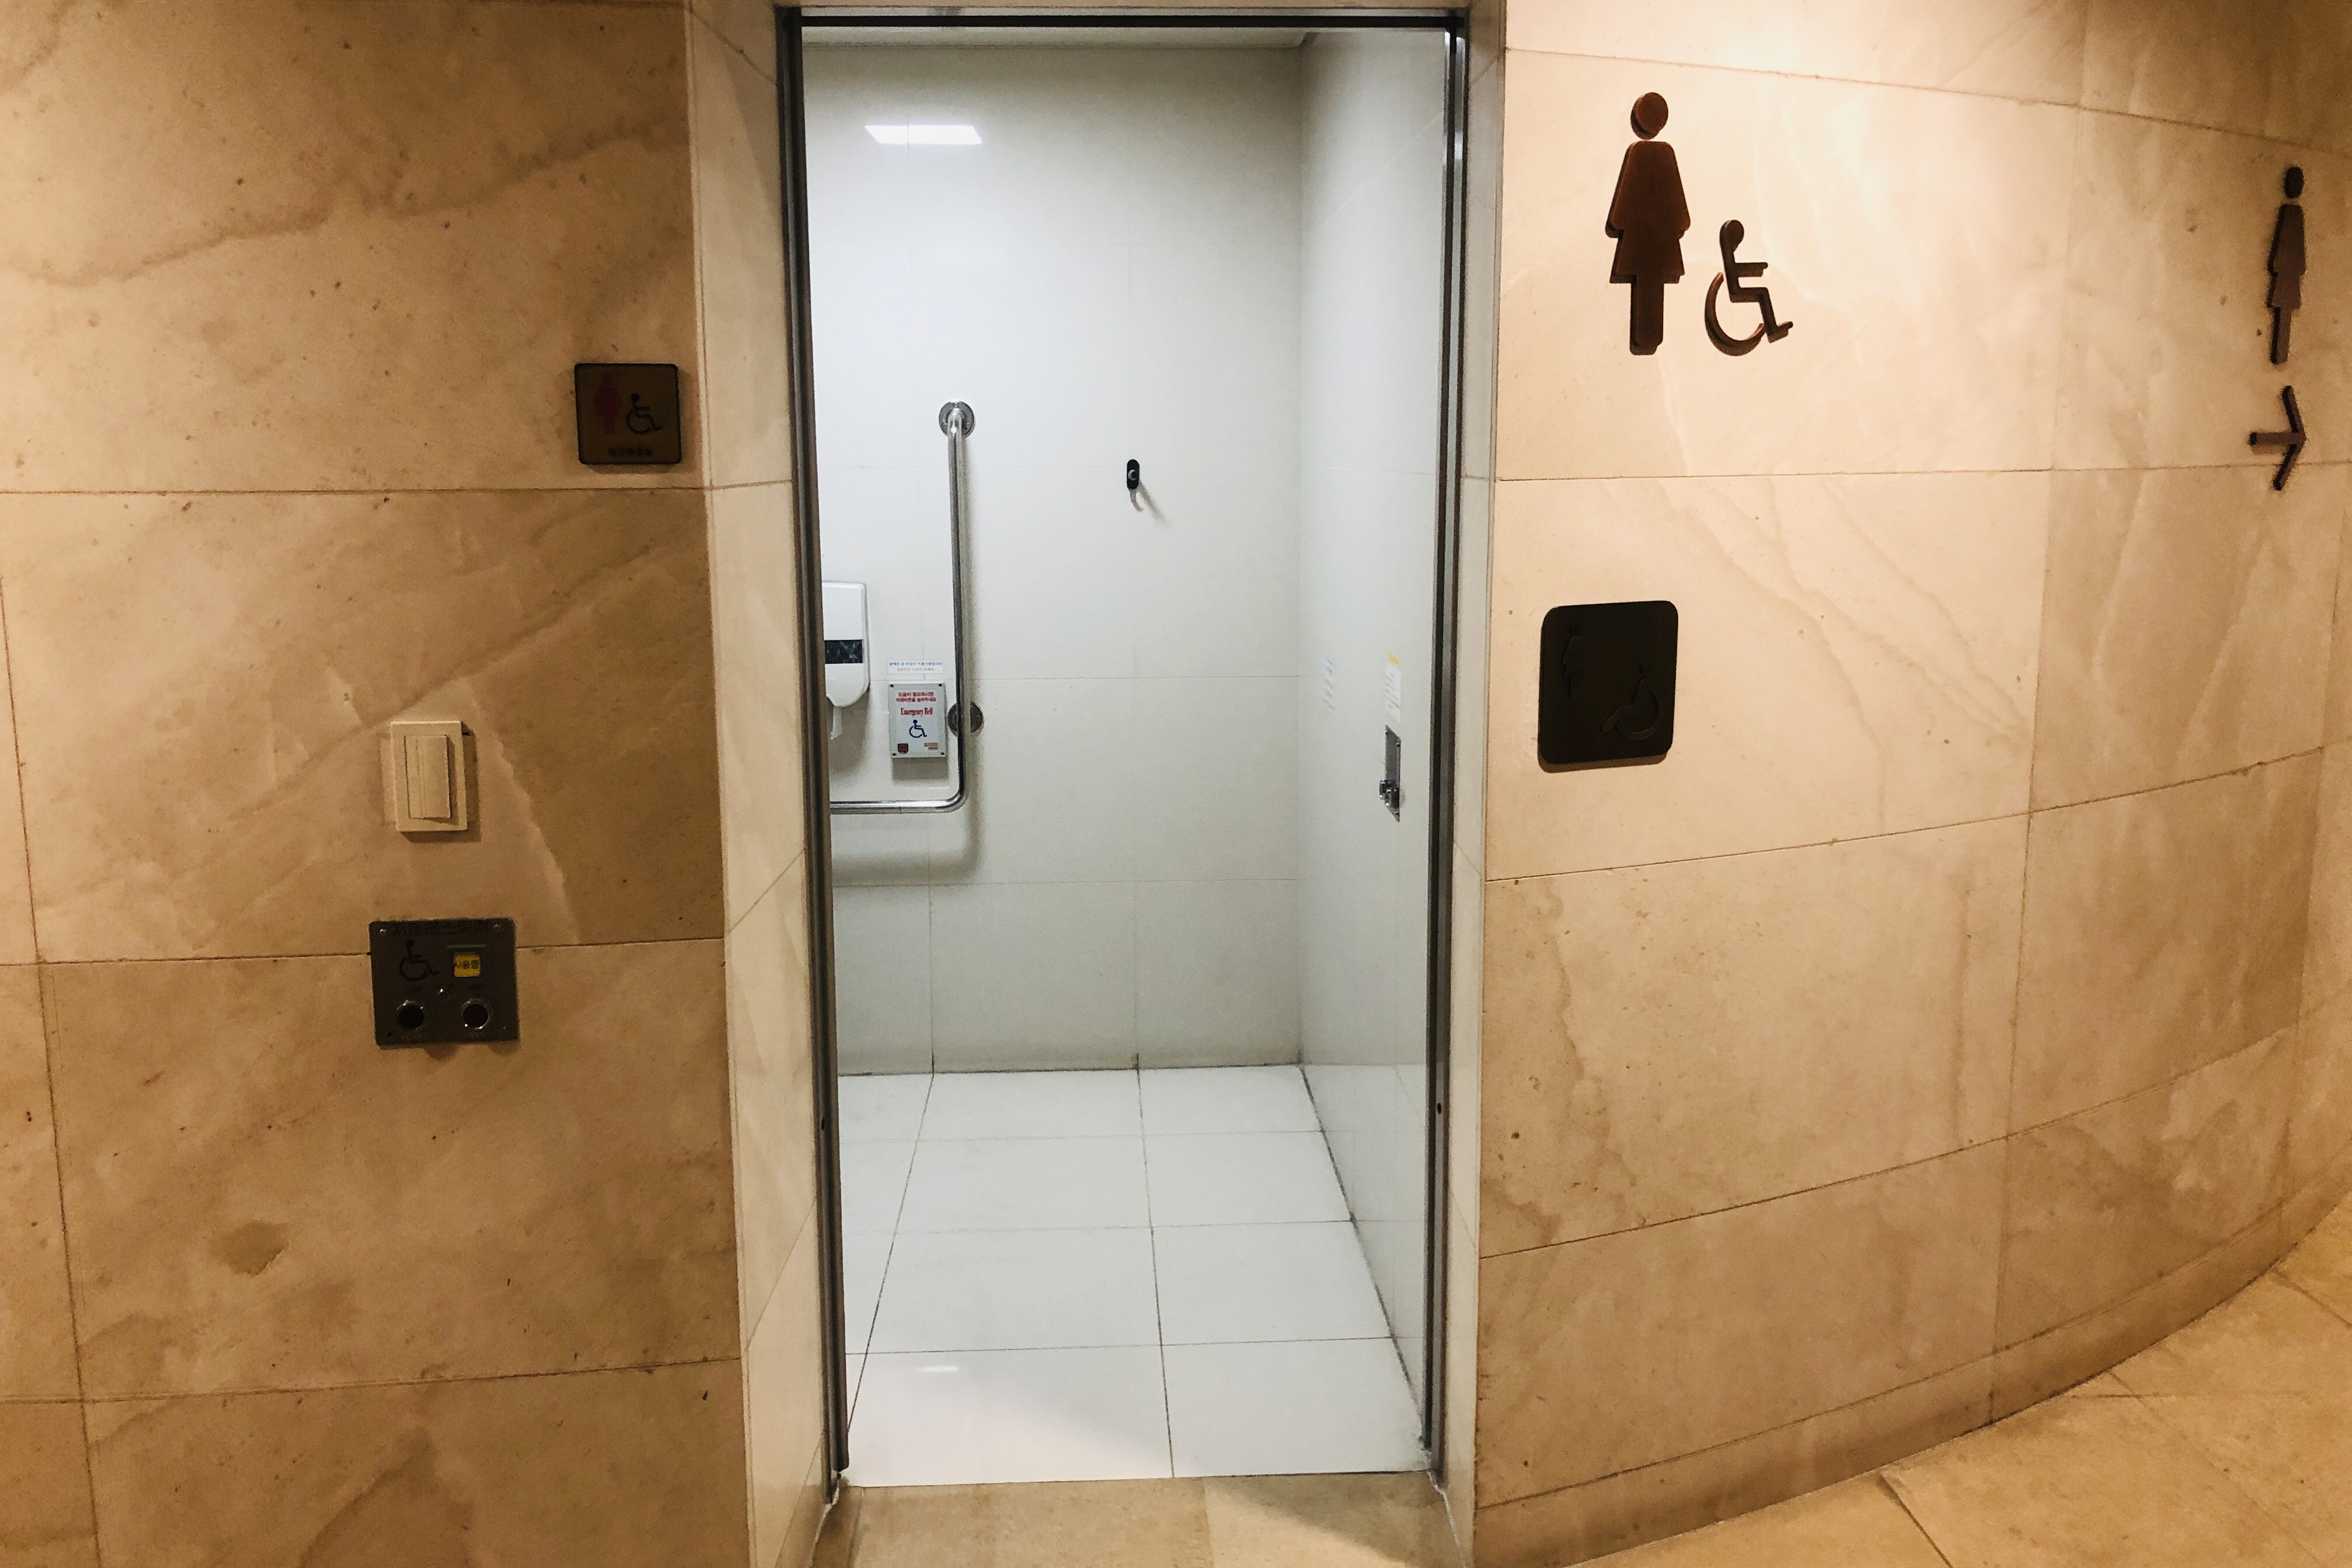 Accessible restroom for persons with disabilities0 : Separated restroom for the persons with disabilities